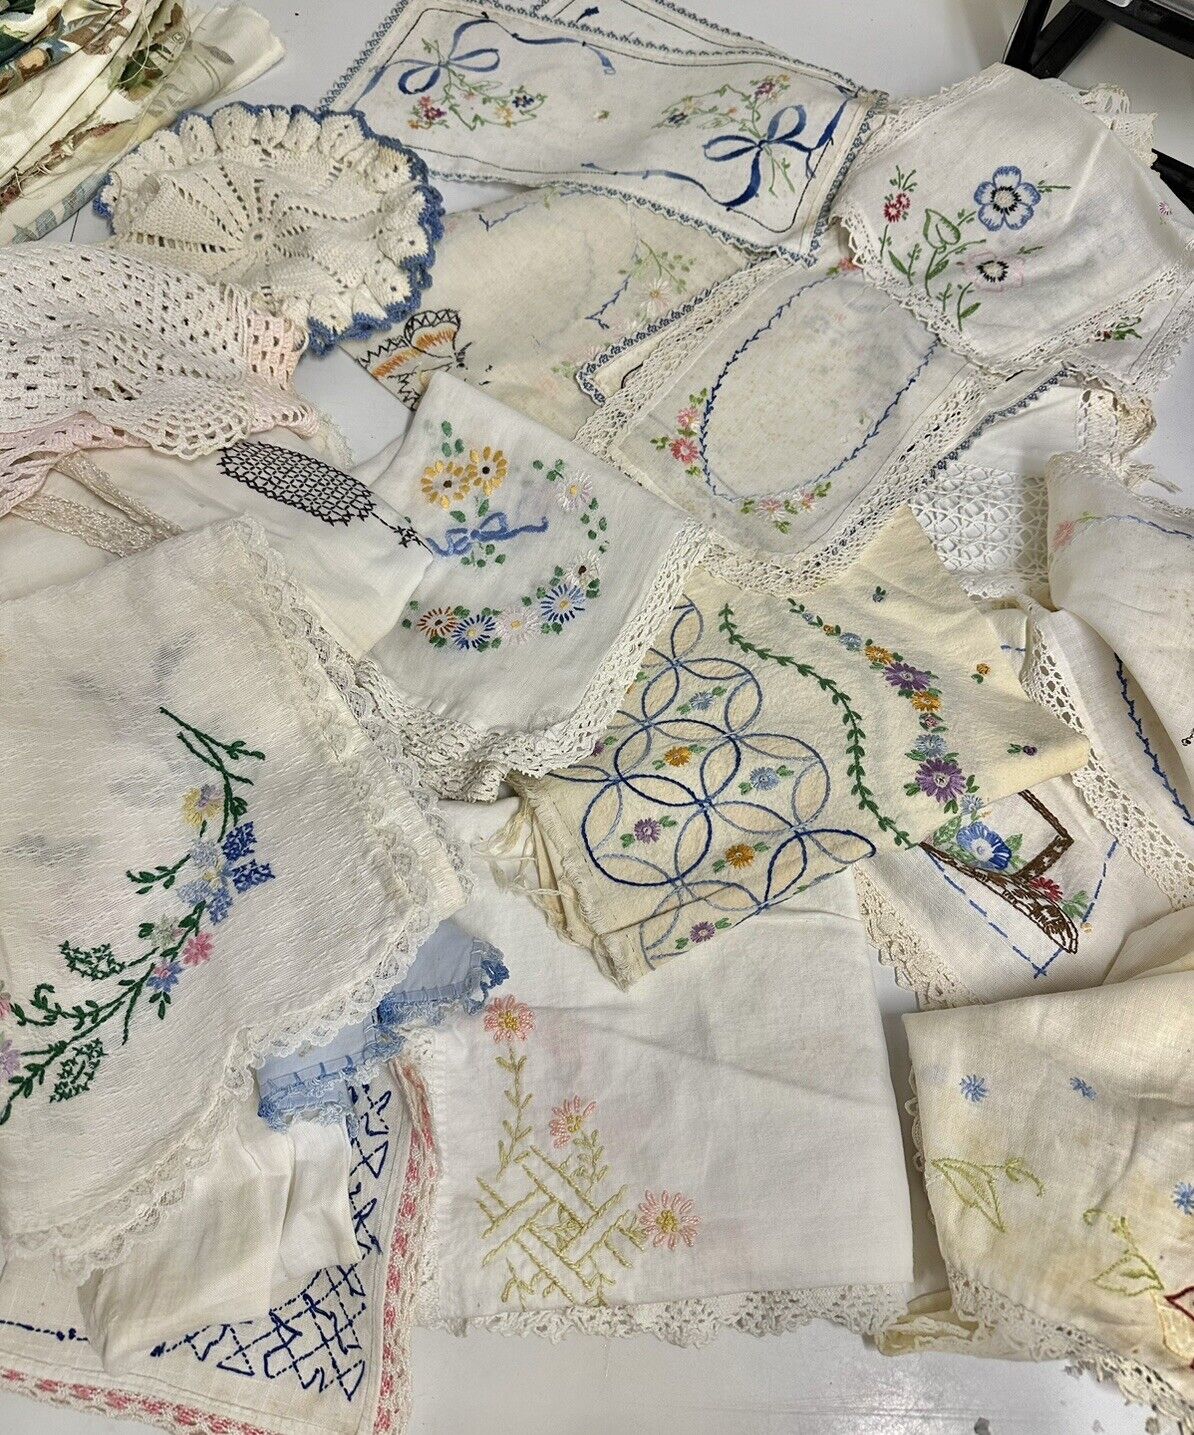 Huge Lot of Vintage Embroidered Hankies, Table Runners, Crochet Doilies